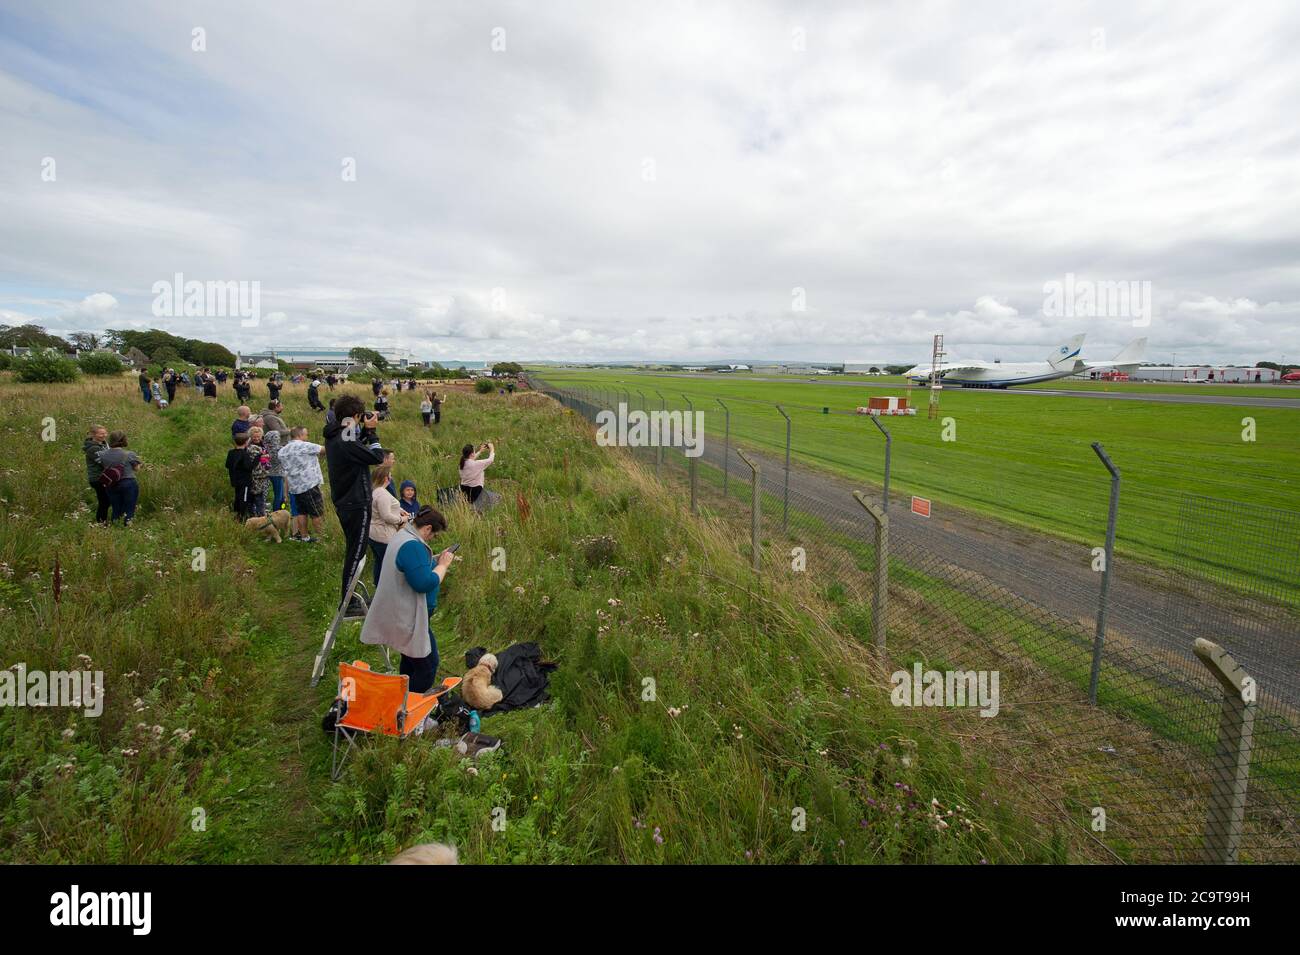 Prestwick, Scotland, UK. 2 August 2020 Pictured: Crowds of aviation enthusiasts and plane spotters turned out to see the Antonov An-225 Mryia (Reg UR-82060) make a scheduled arrival for a refeulling stop at Glasgow Prestwick Airport from Bangor, USA before departing at 4.30pm for Châteauroux-Centre Airport in France. The giant strategic airlift cargo plane behemoth is powered by six massive Six Ivchenko Progress Lotarev D-18T three shaft turbofan engines, has a maximum takeoff weight of 640 tonnes. Credit: Colin Fisher/Alamy Live News Stock Photo